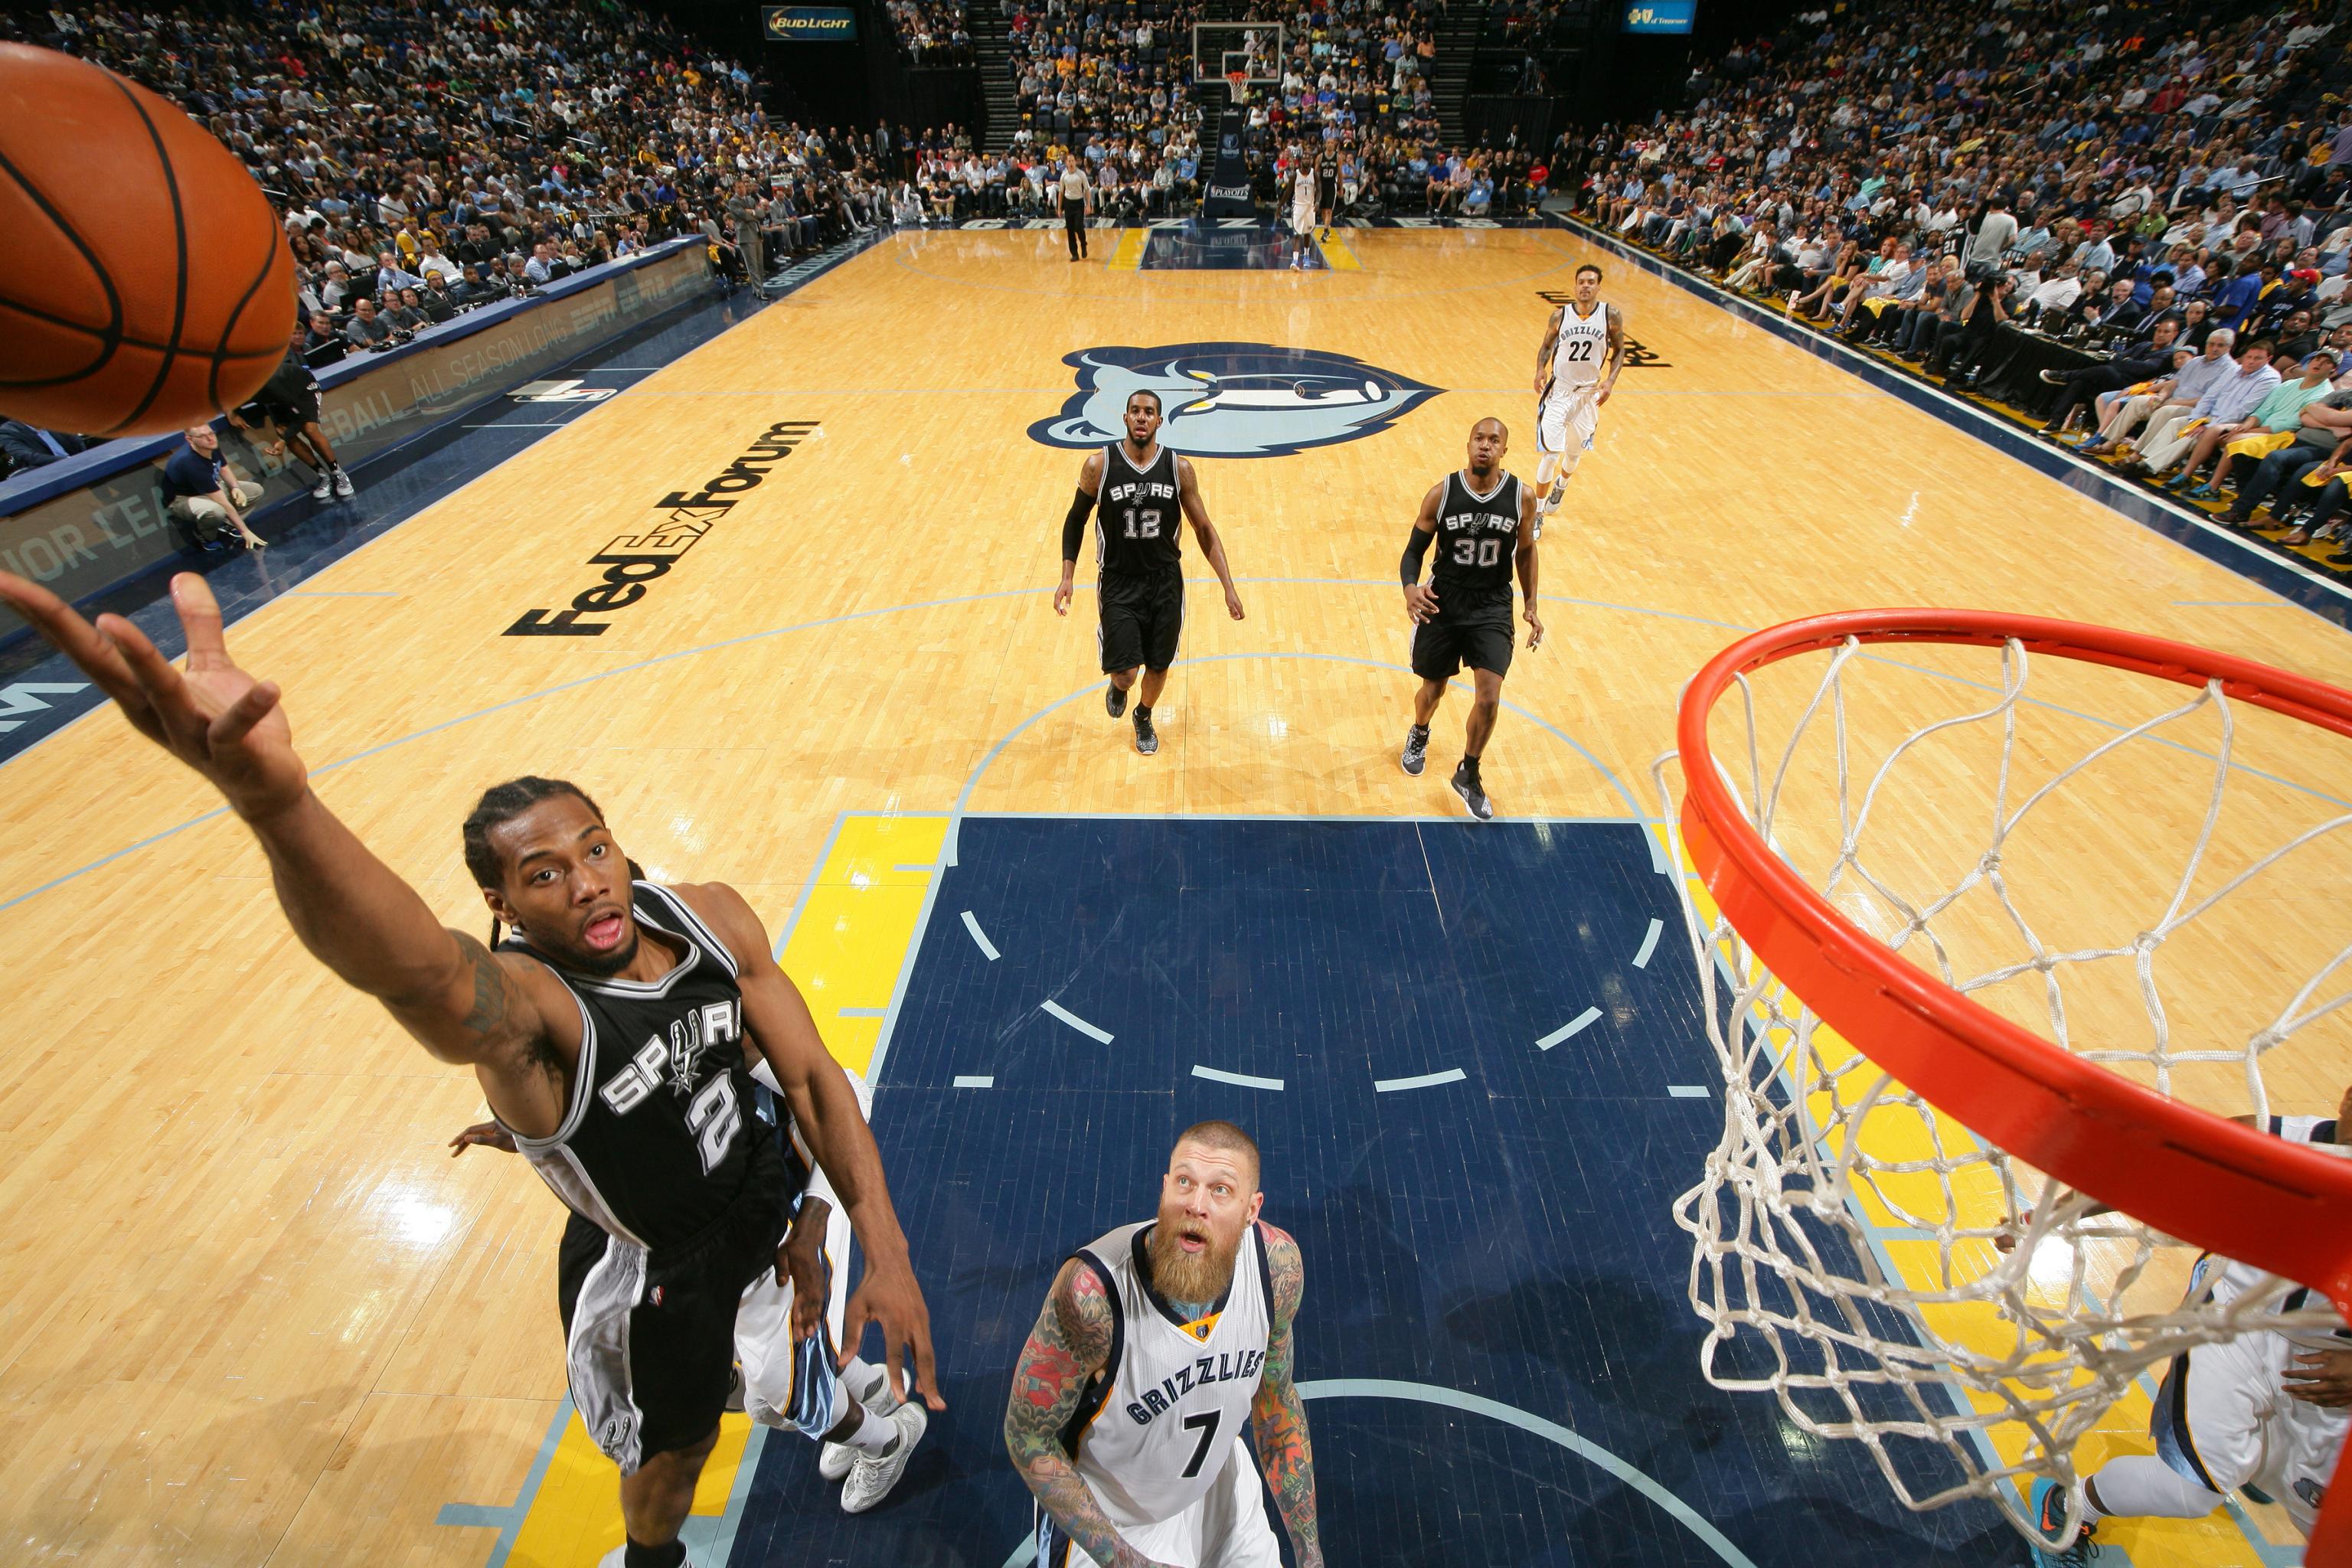 Spurs-Grizzlies: Spurs' 3-point shooting left Grizzlies out of